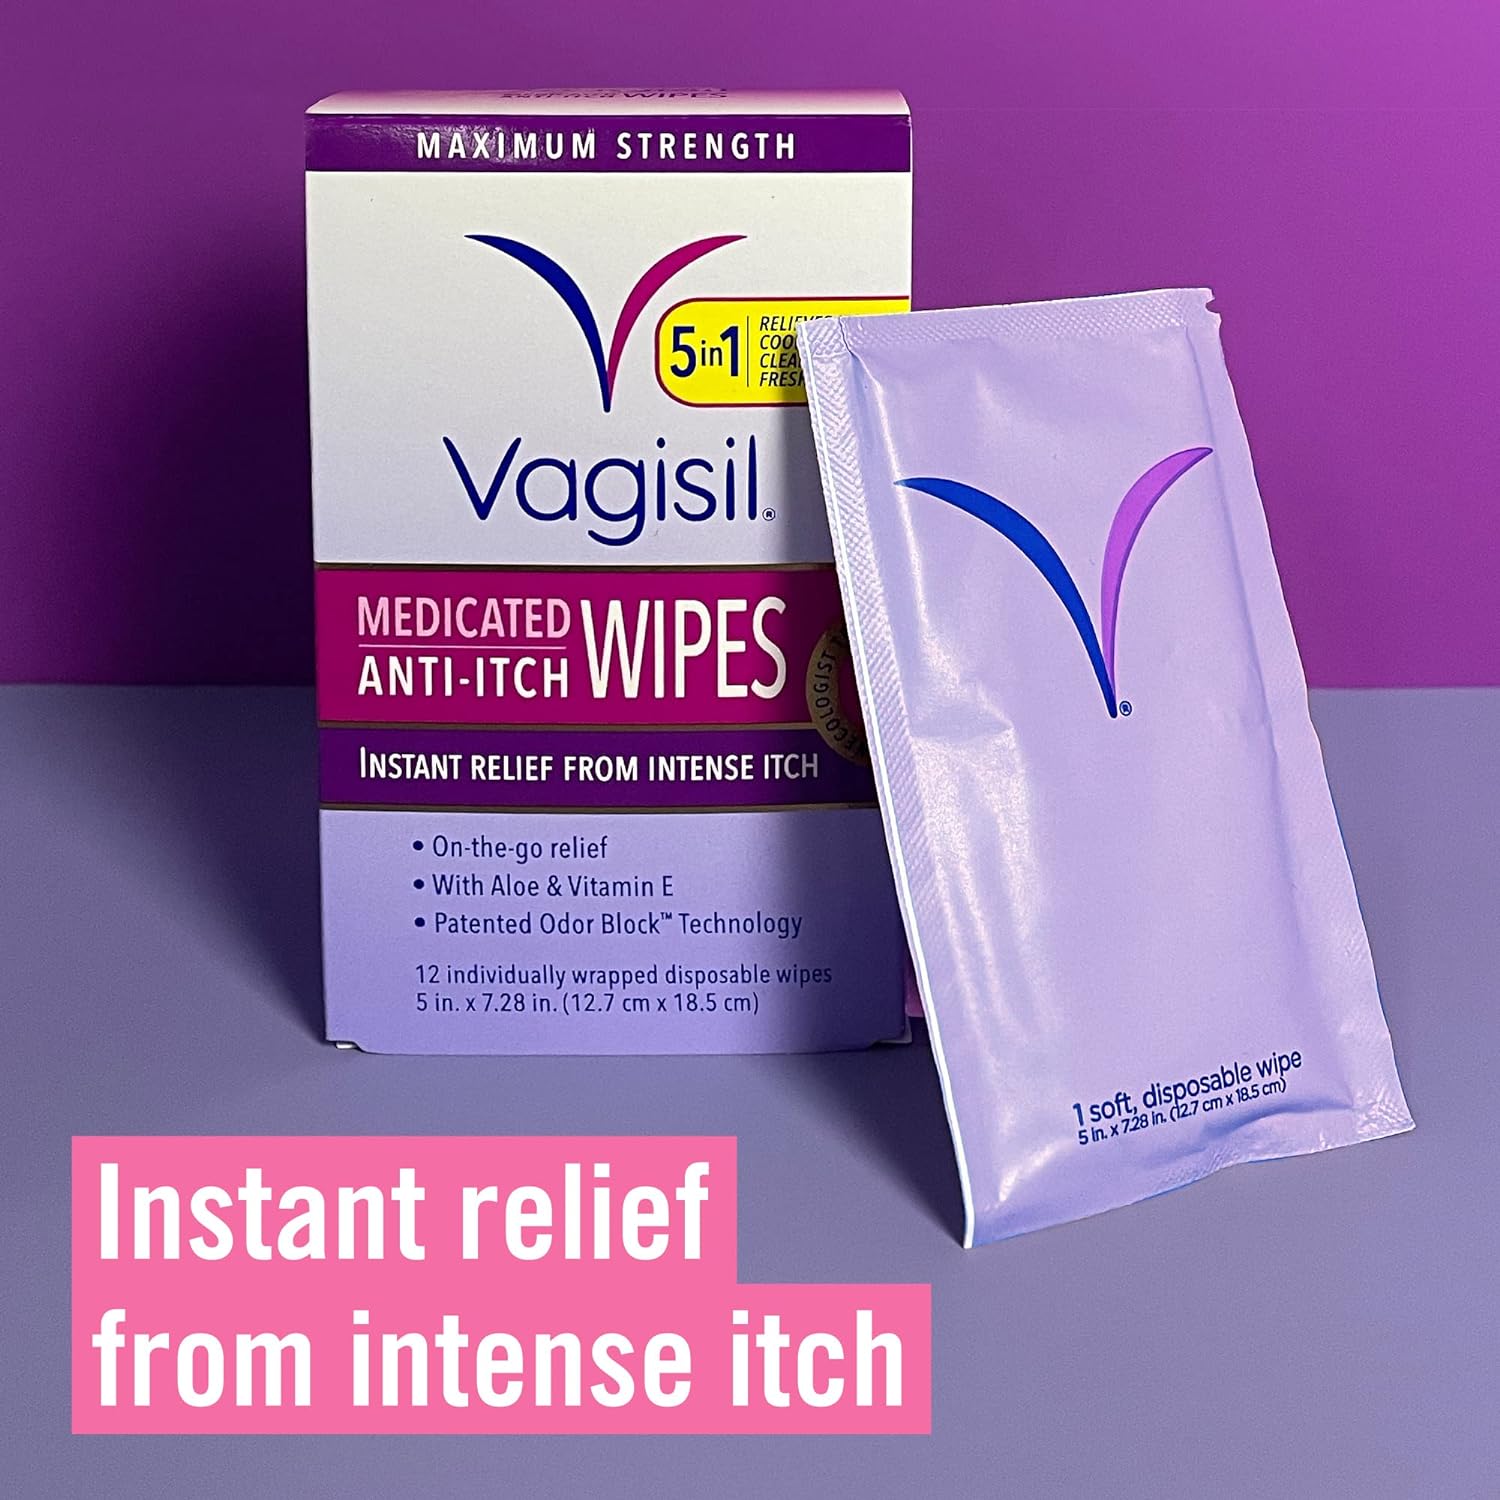 Vagisil Anti-Itch Medicated Feminine Intimate Wipes for Women, Maximum Strength, Gynecologist Tested, 12 Wipes (Pack of 1) : Health & Household